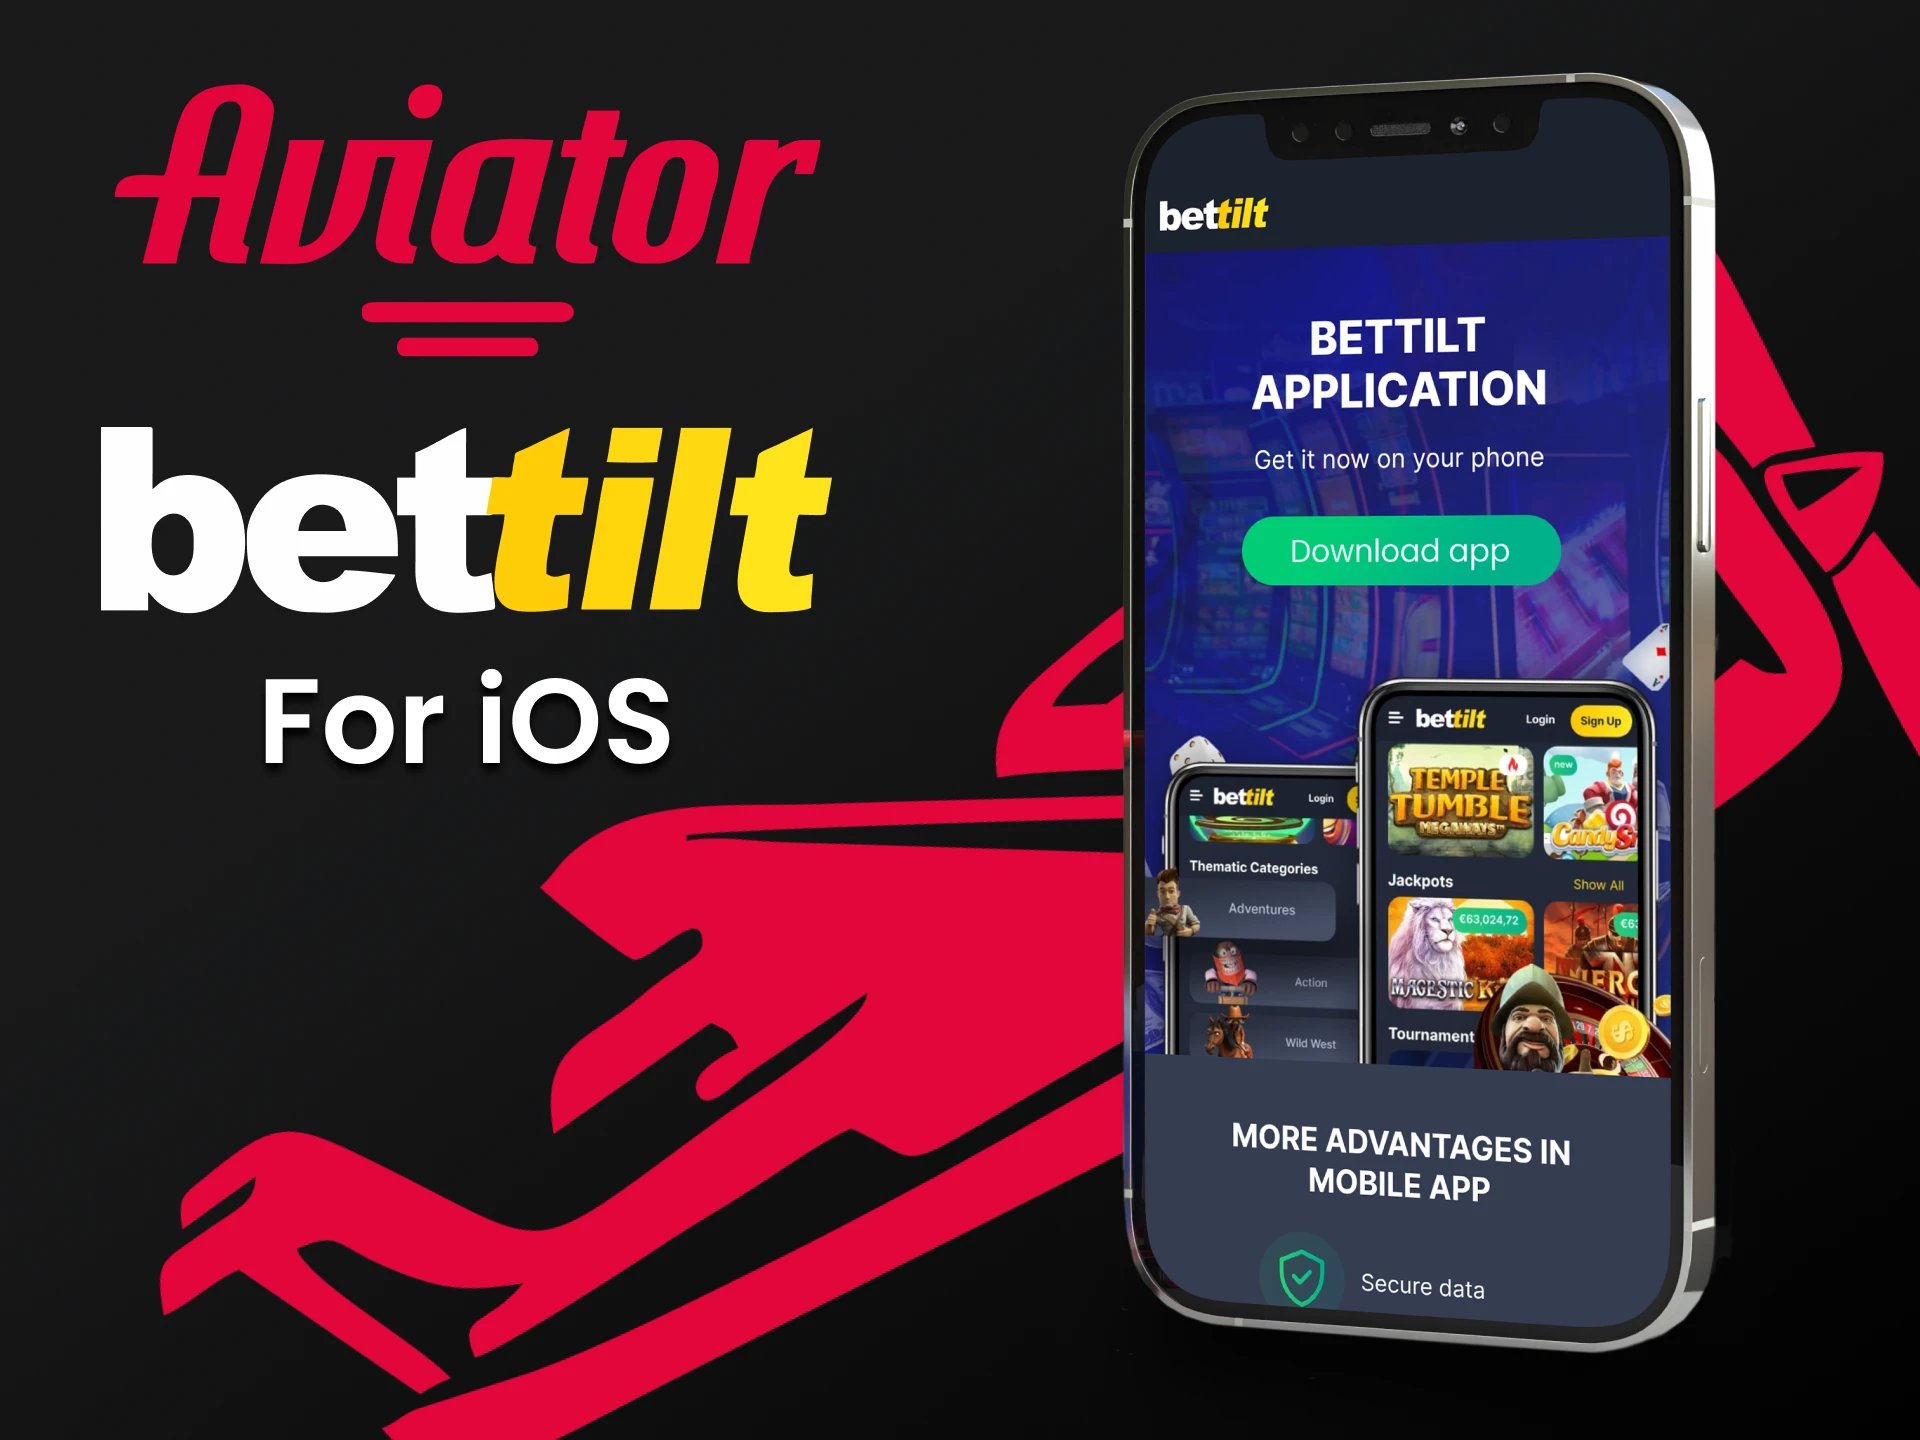 Download Bettilt on iOS to play Aviator.